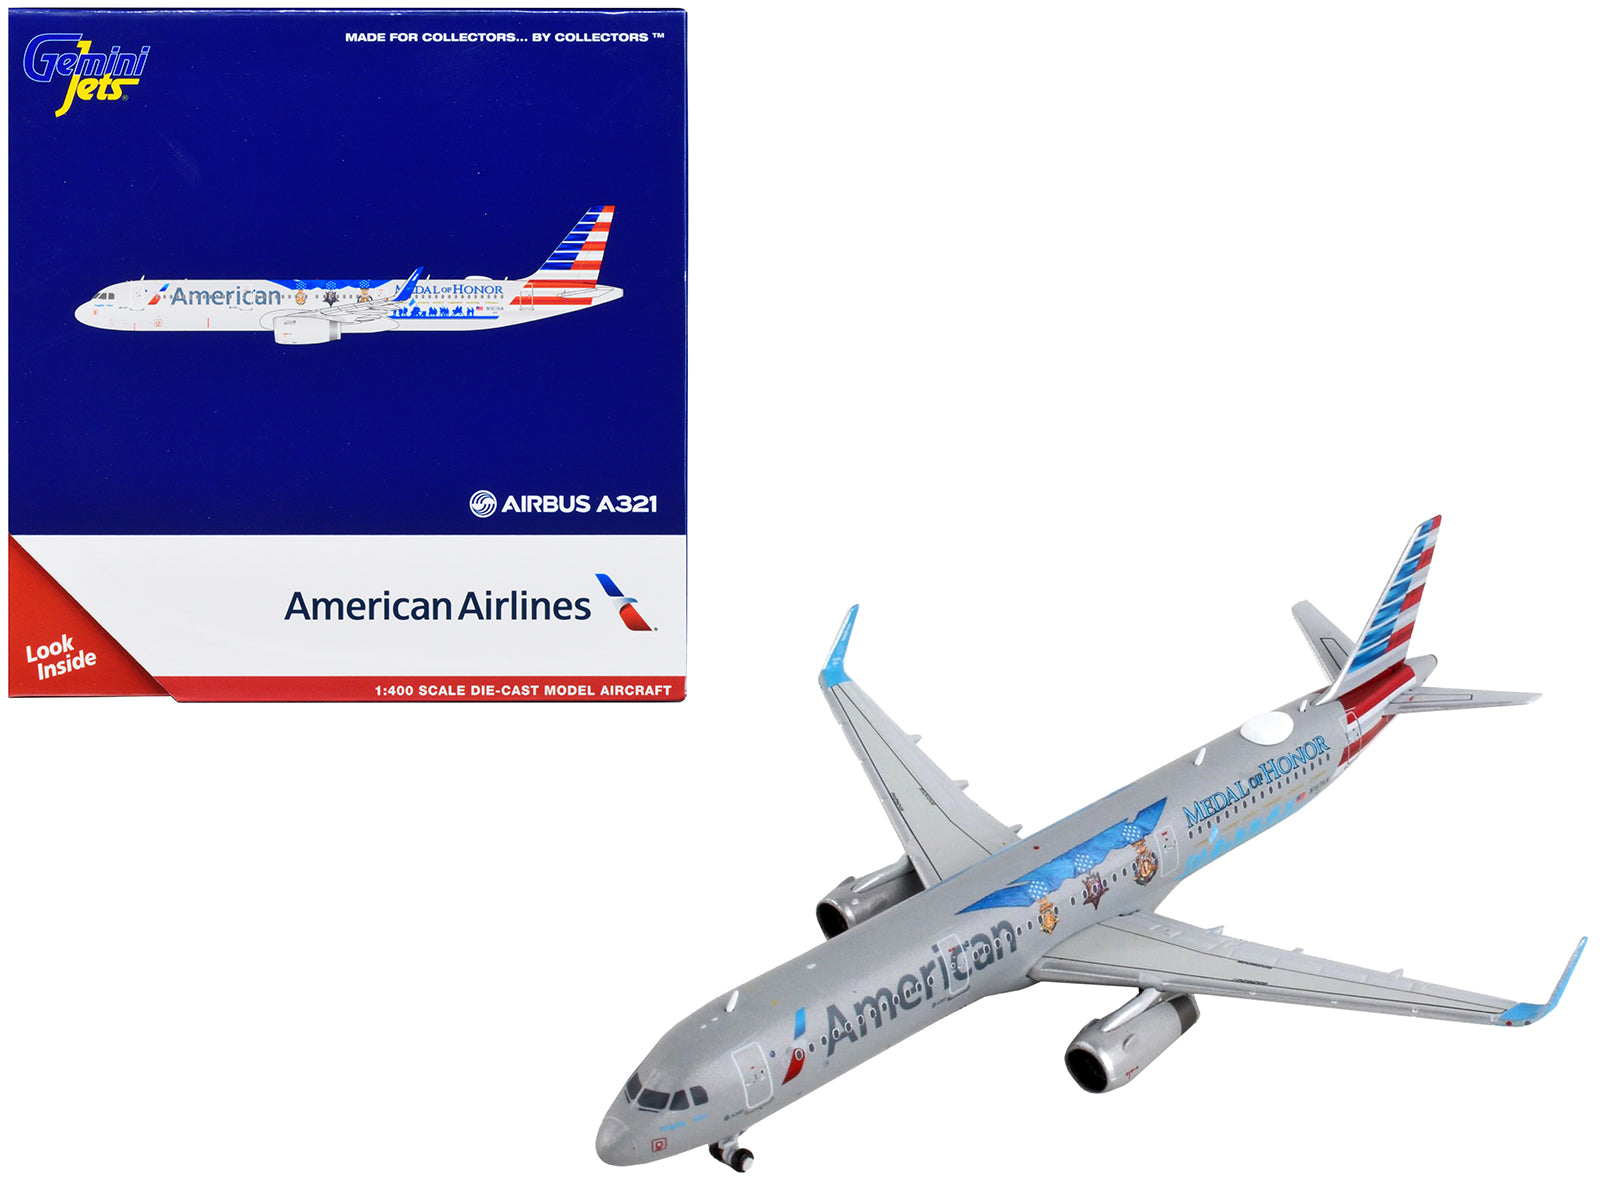 Airbus A321 Commercial Aircraft "American Airlines - Medal of Honor" Gray 1/400 Diecast Model Airplane by GeminiJets